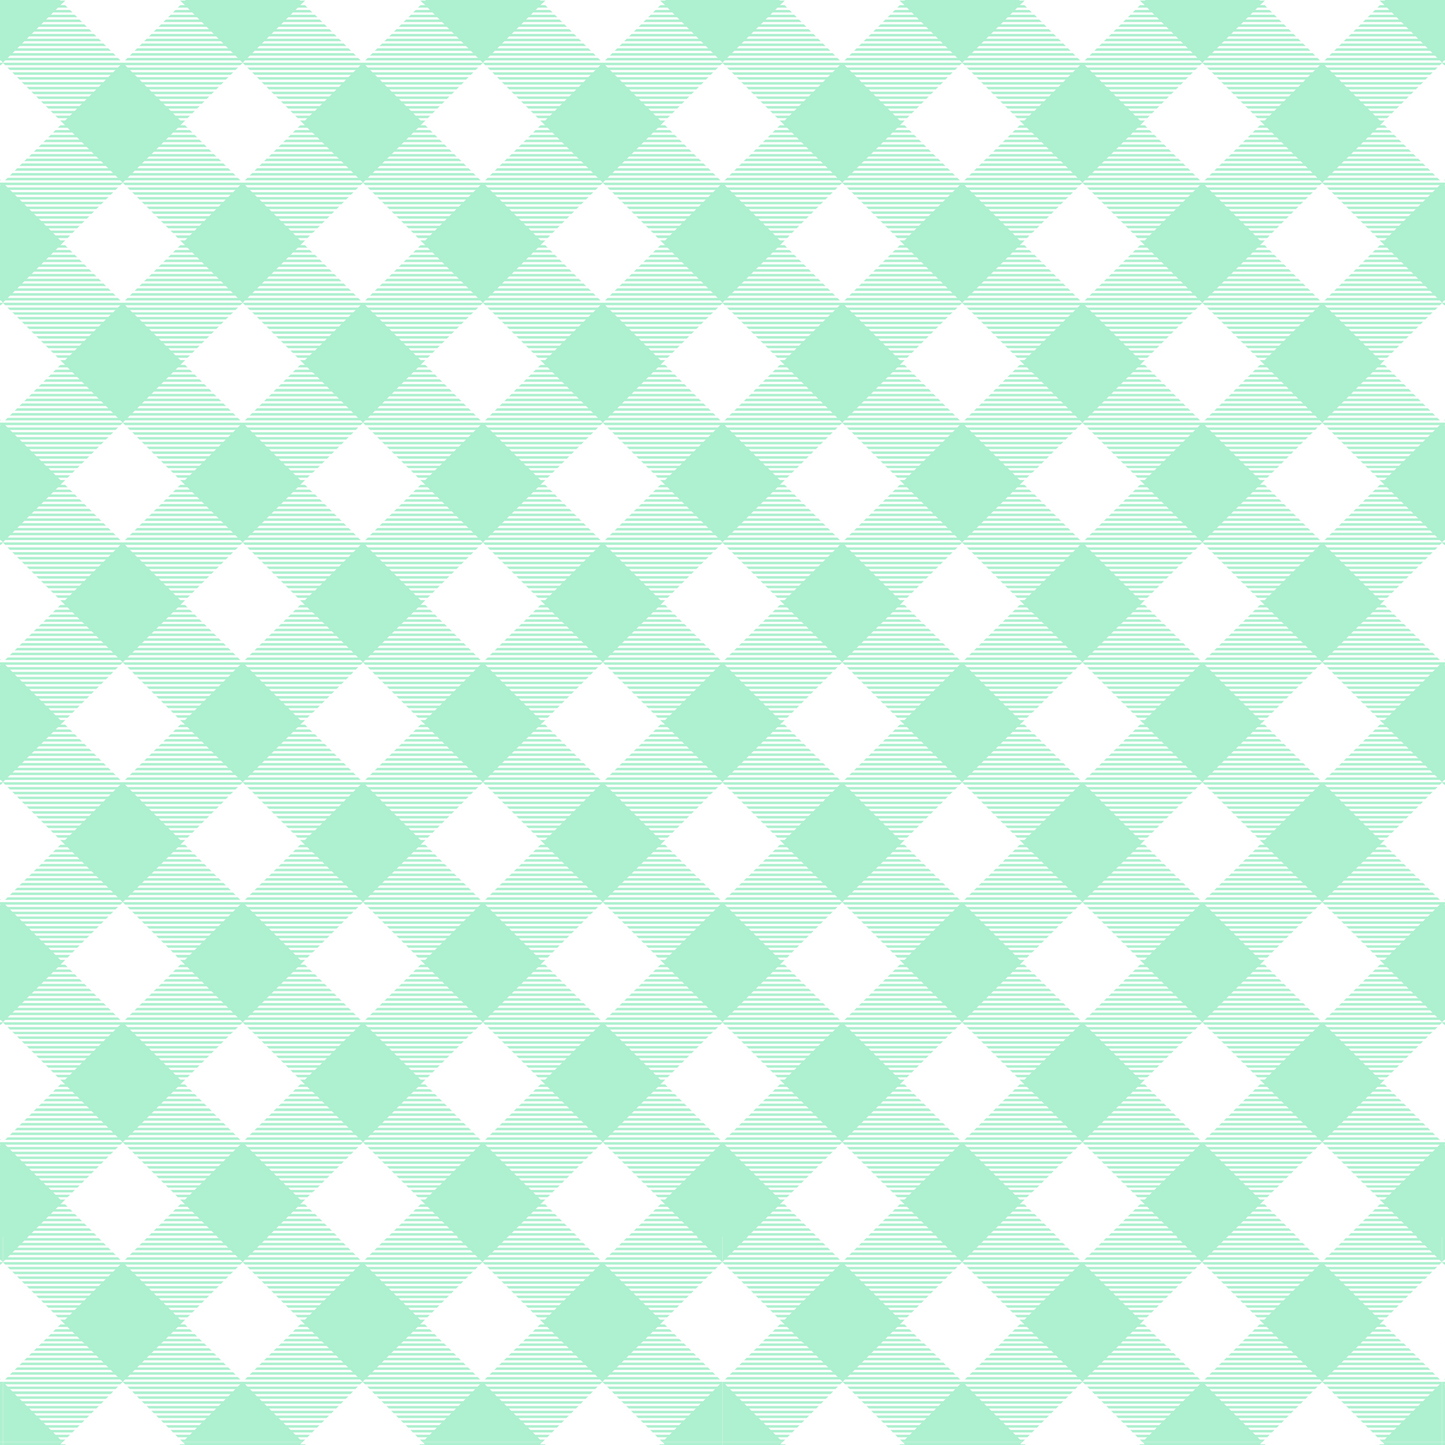 Easter Plaid - Green and White 002